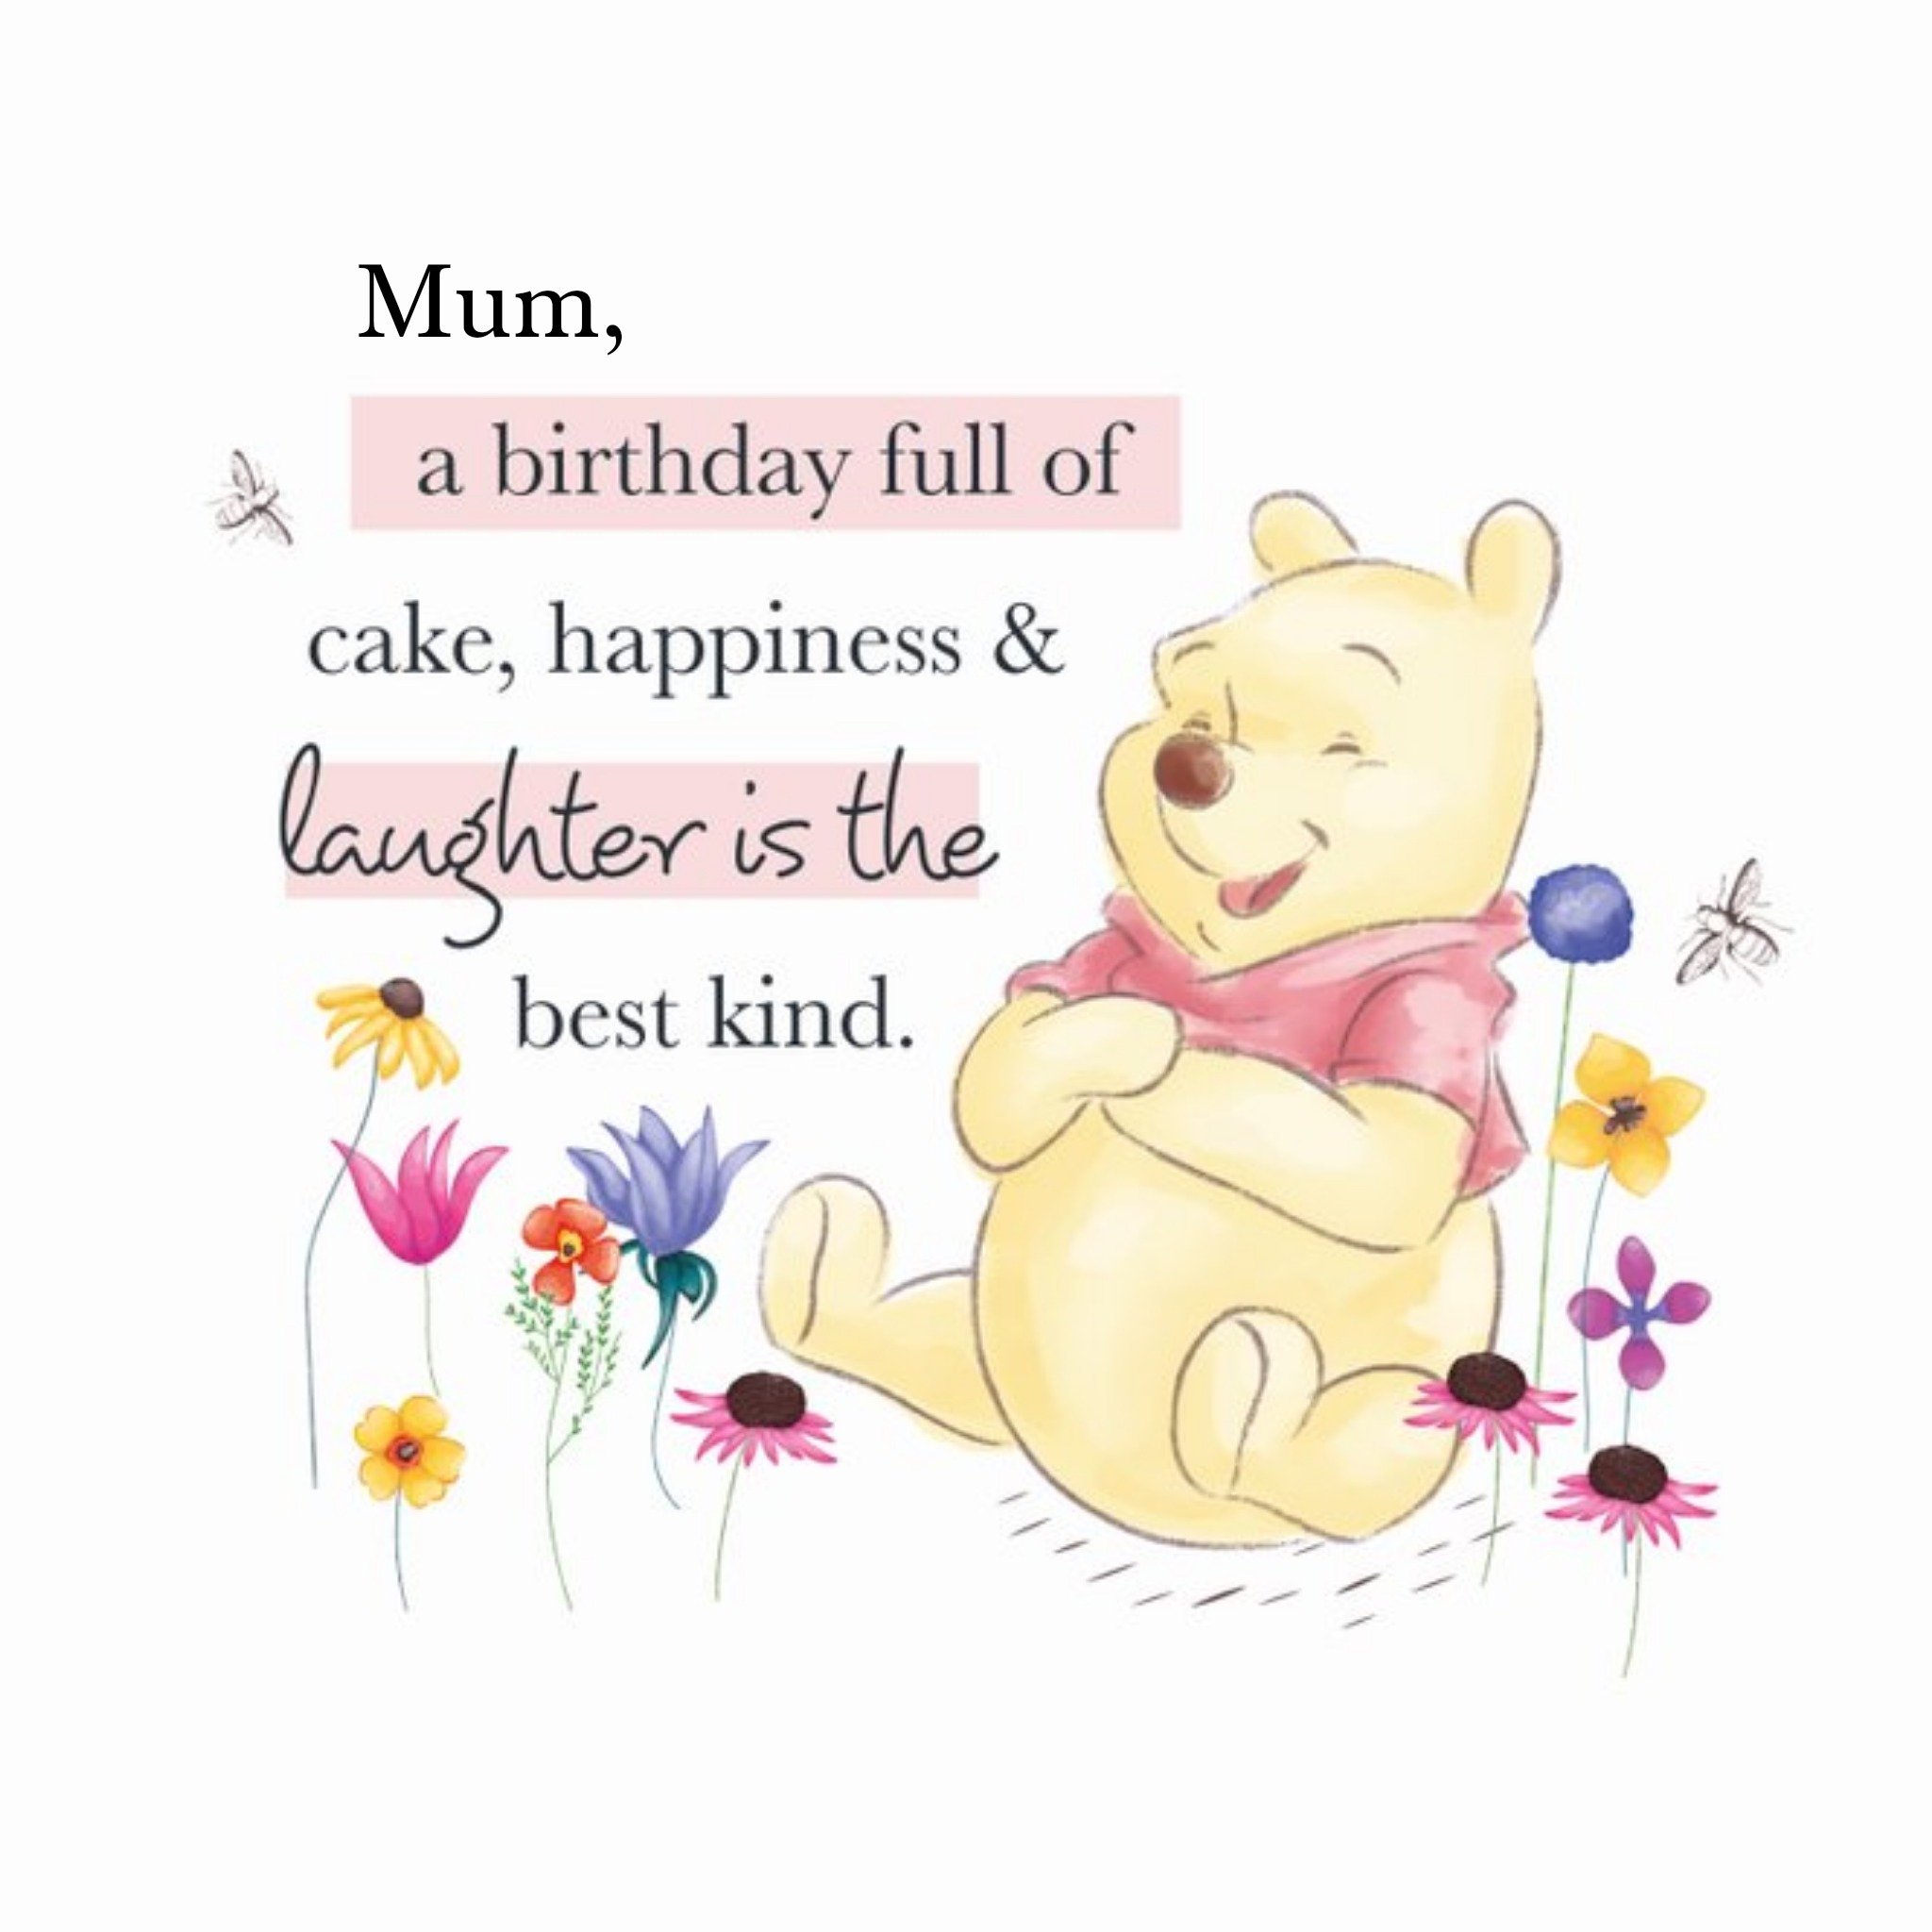 Disney Winnie The Pooh Cake Happiness And Laughter Birthday Card For Mum, Large